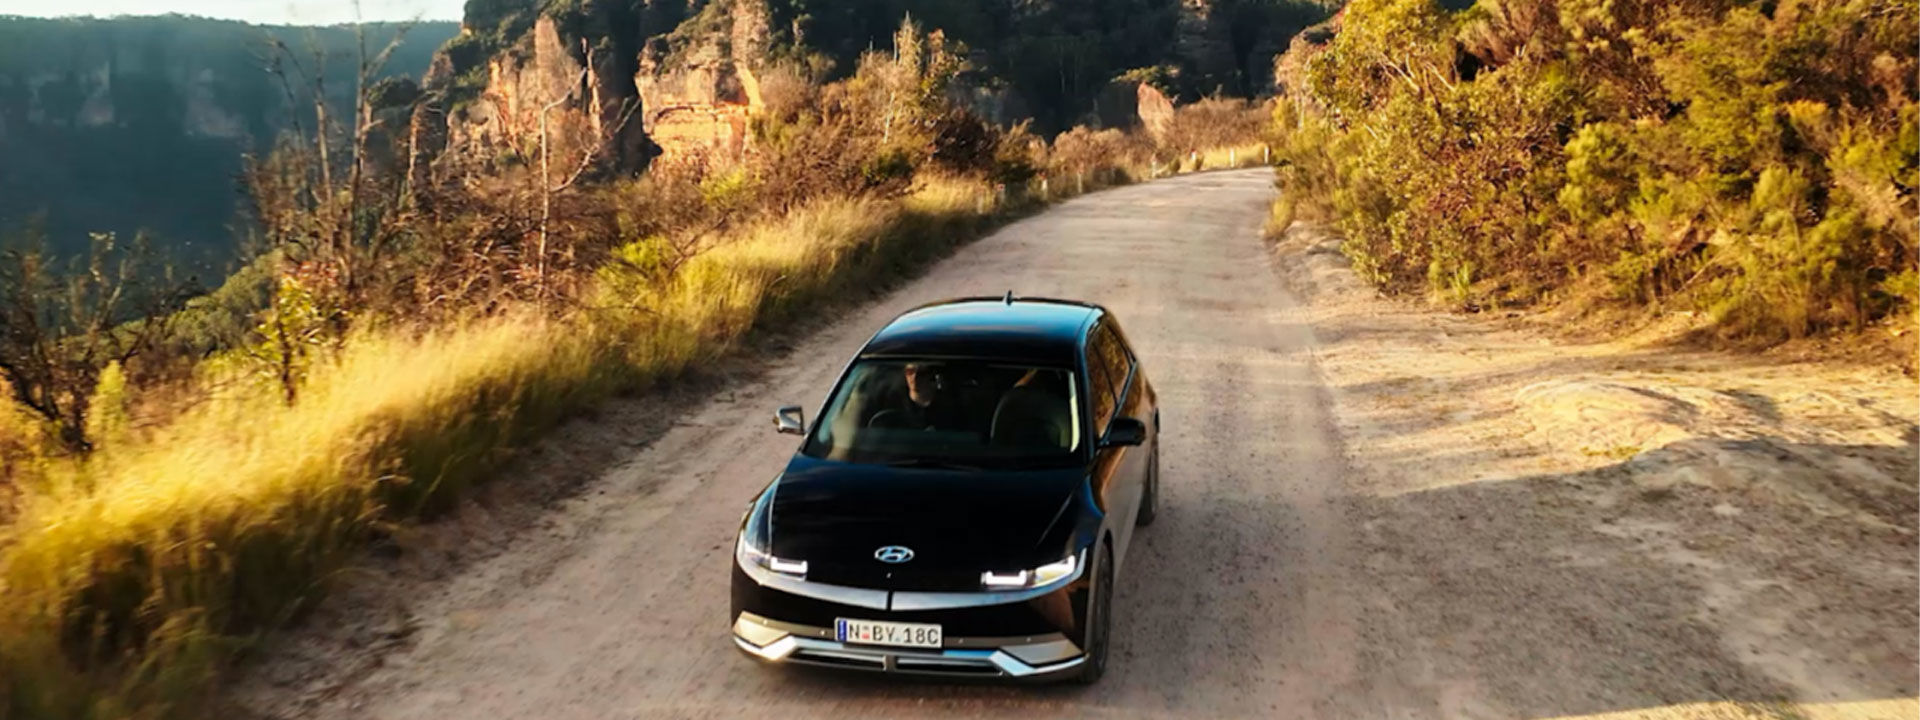 Image-1_-Hyundai-IONIQ-5-Drives-Sustainability-Campaign-with-Upcoming-Show,-Down-to-Earth-with-Zac-Efron-Down-Under_1920x720.jpg